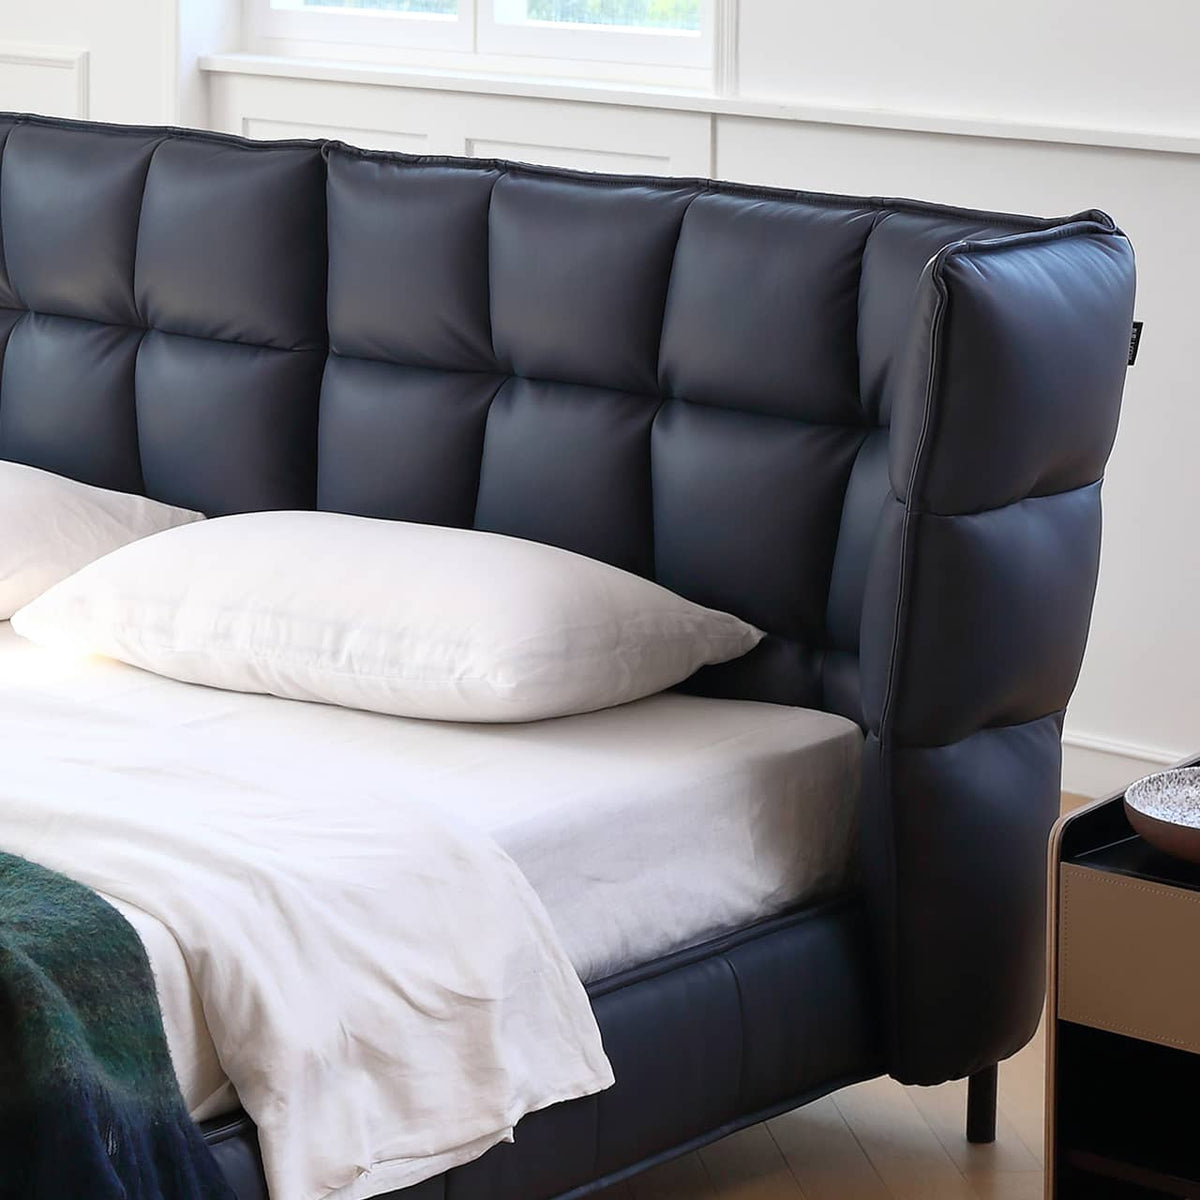 Luxurious Black Pine Bed with Leather Upholstery and Silk Floss Comfort my-381